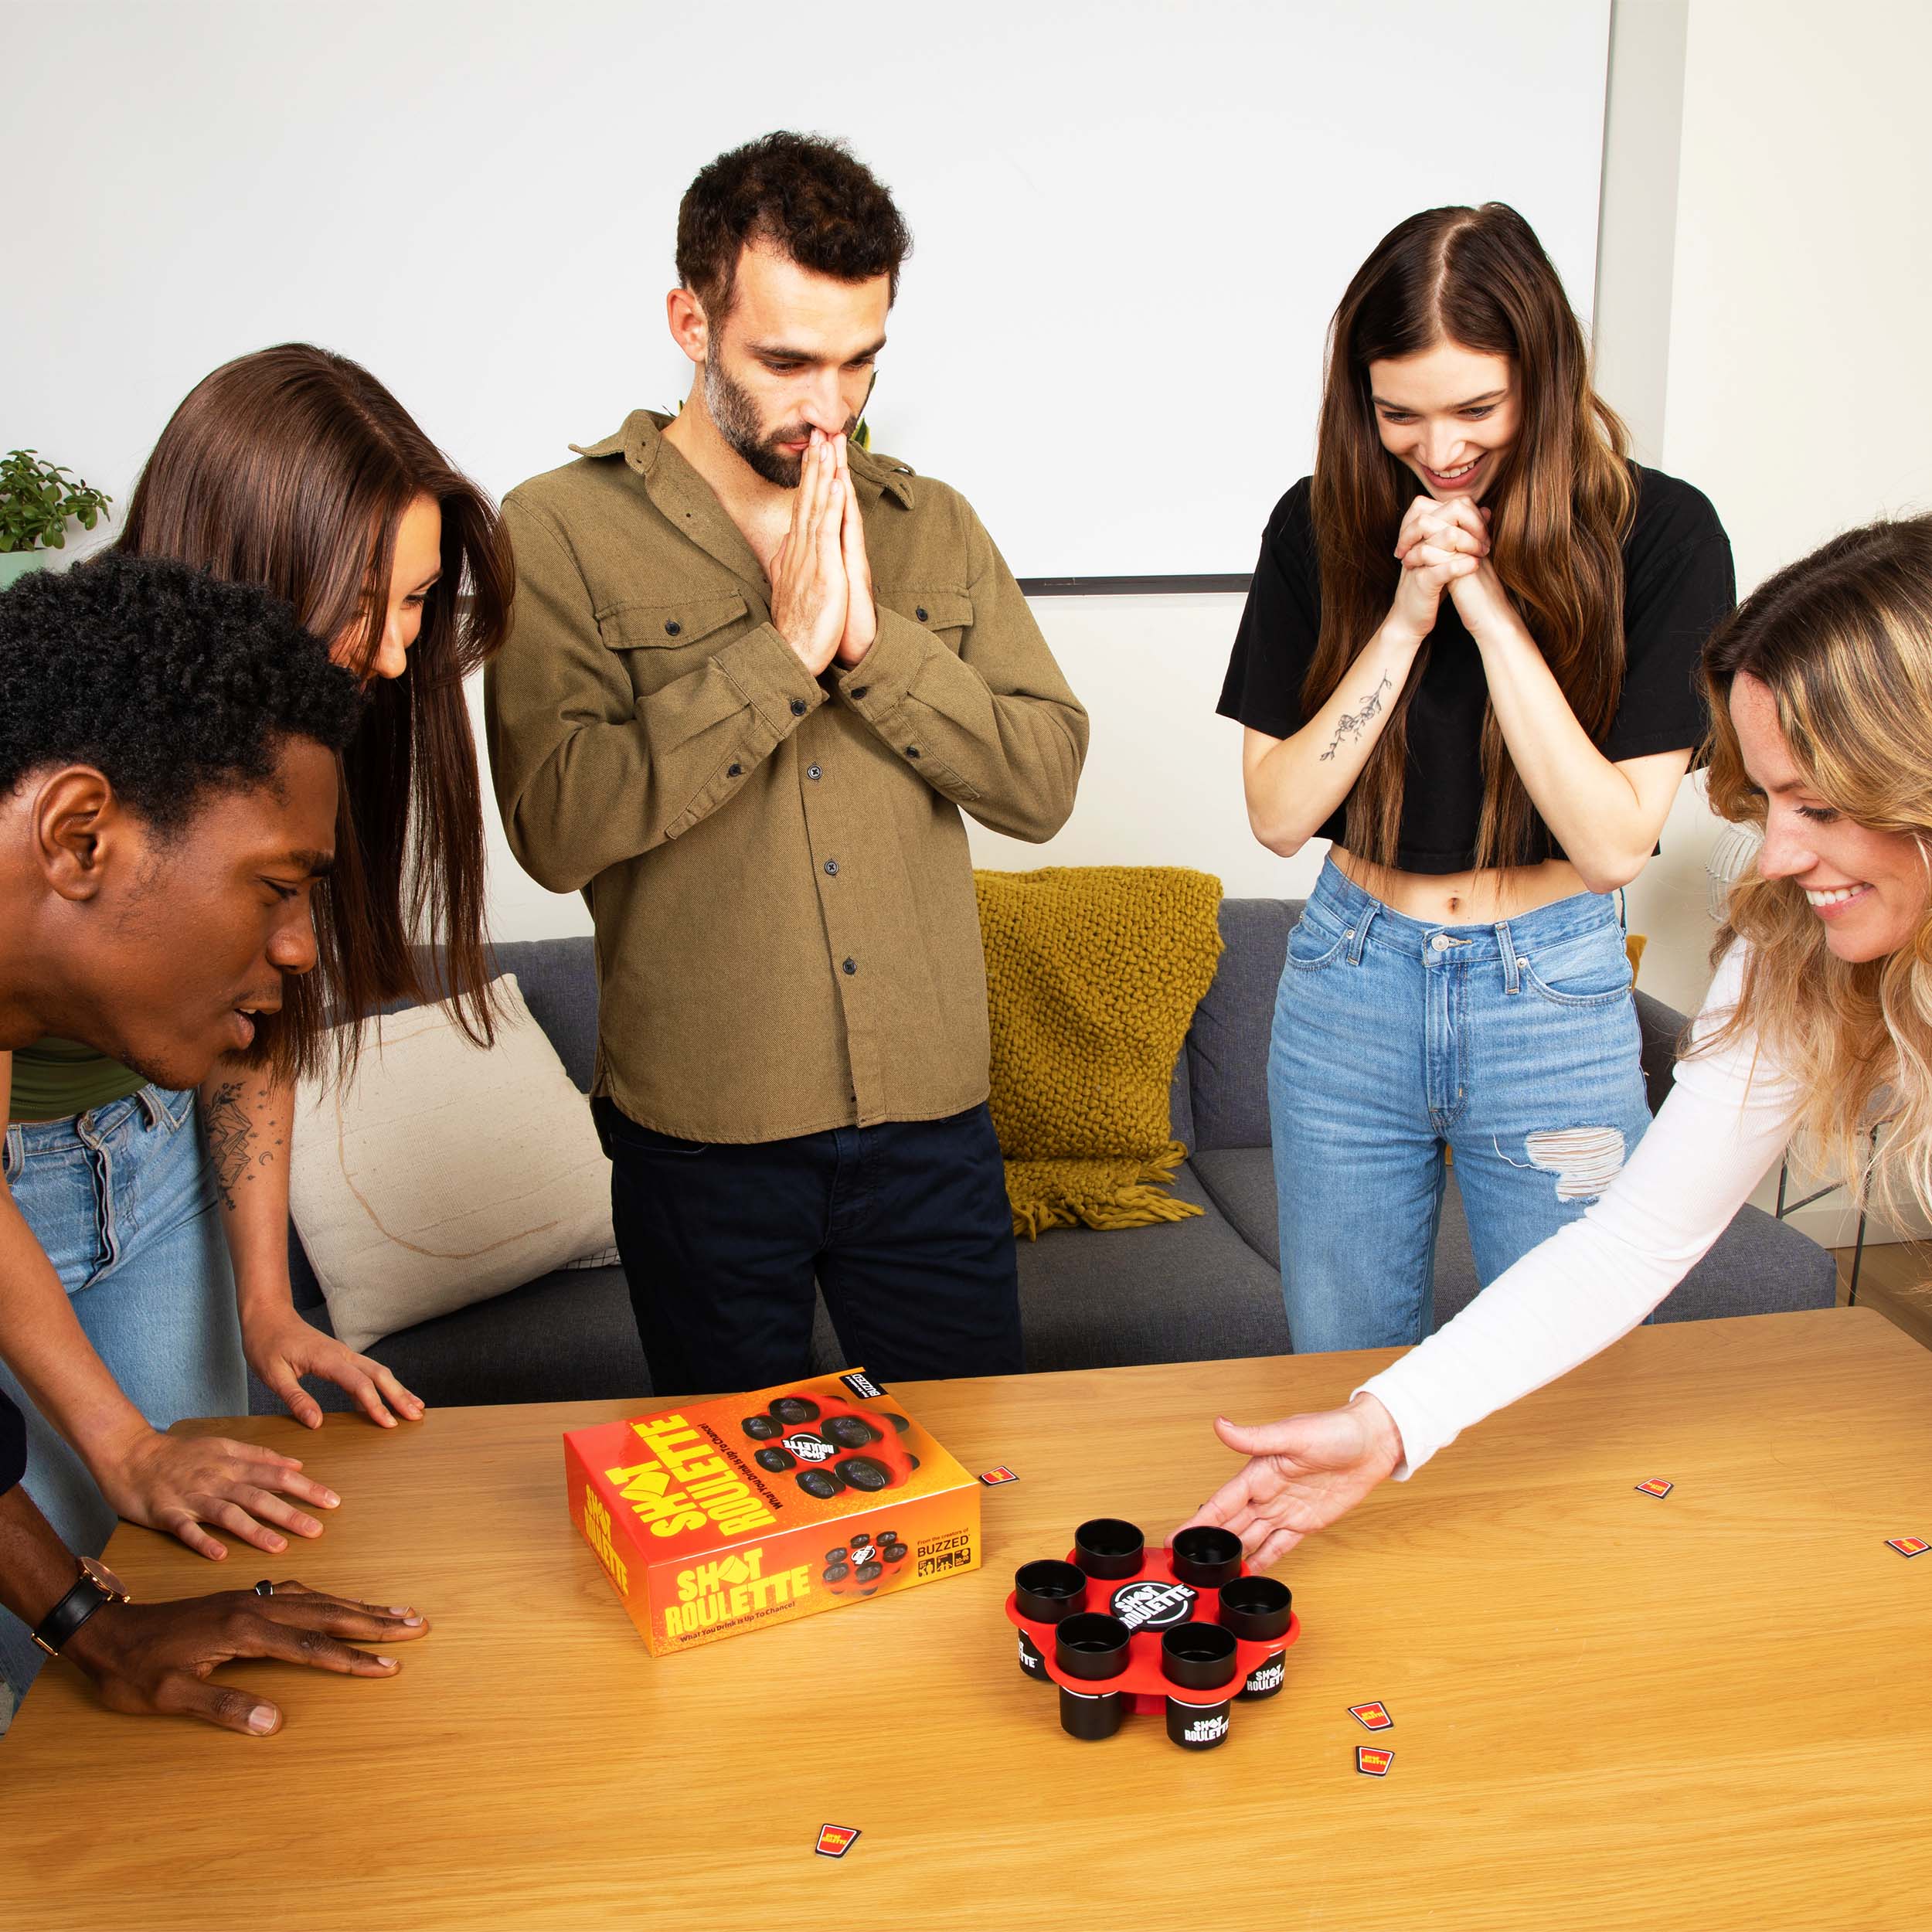 Shot Roulette: A Drinking Game For Friends That Tests Your Poker Face